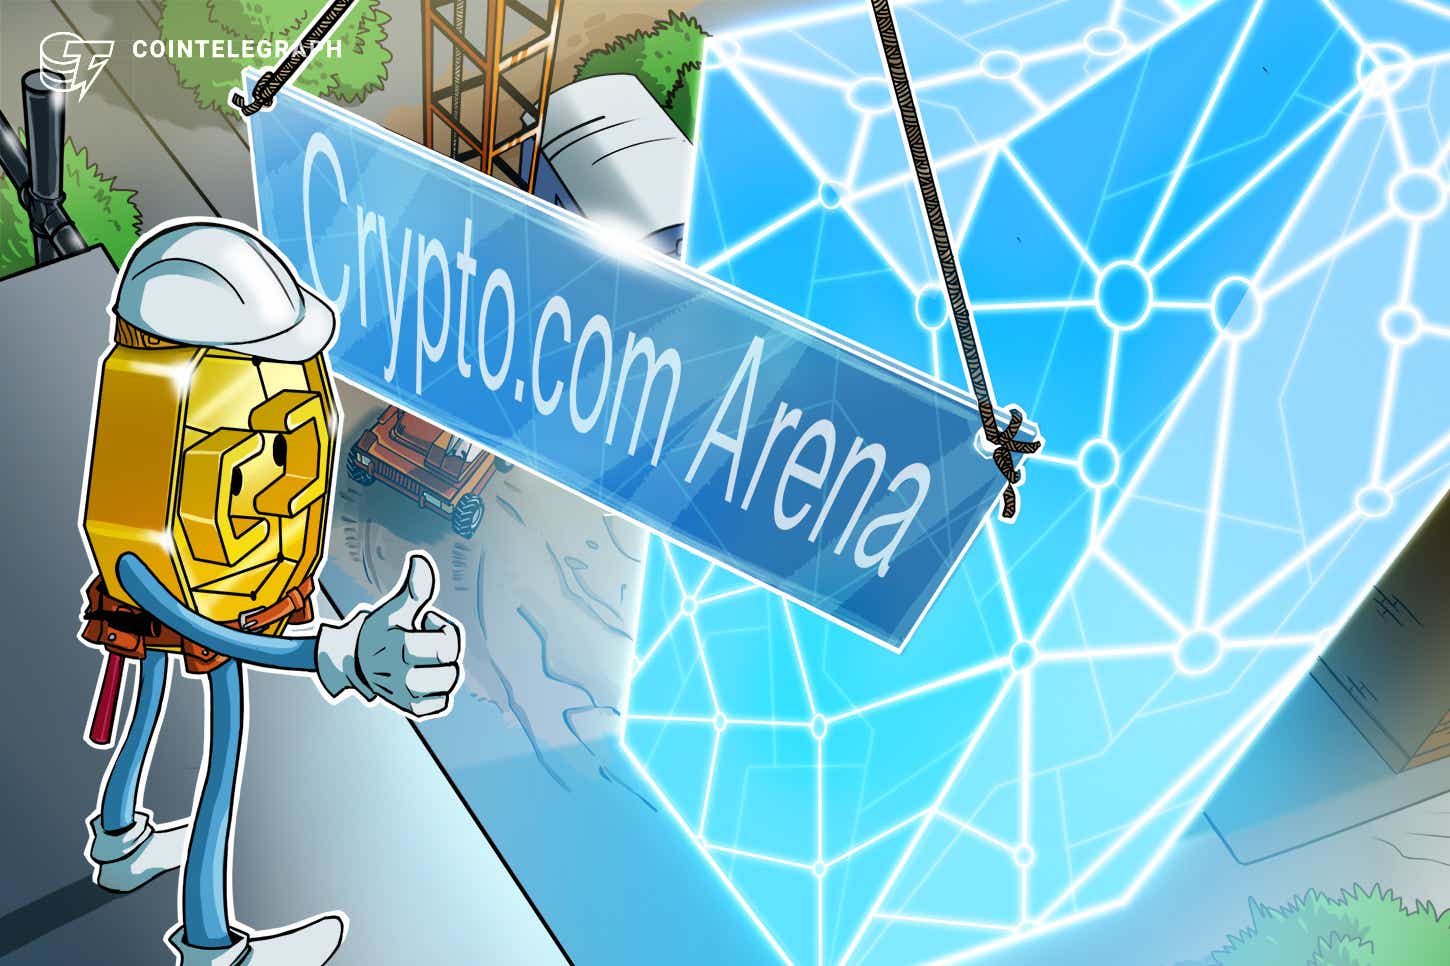 Staples-center-in-los-angeles-will-be-renamed-crypto.com-arena